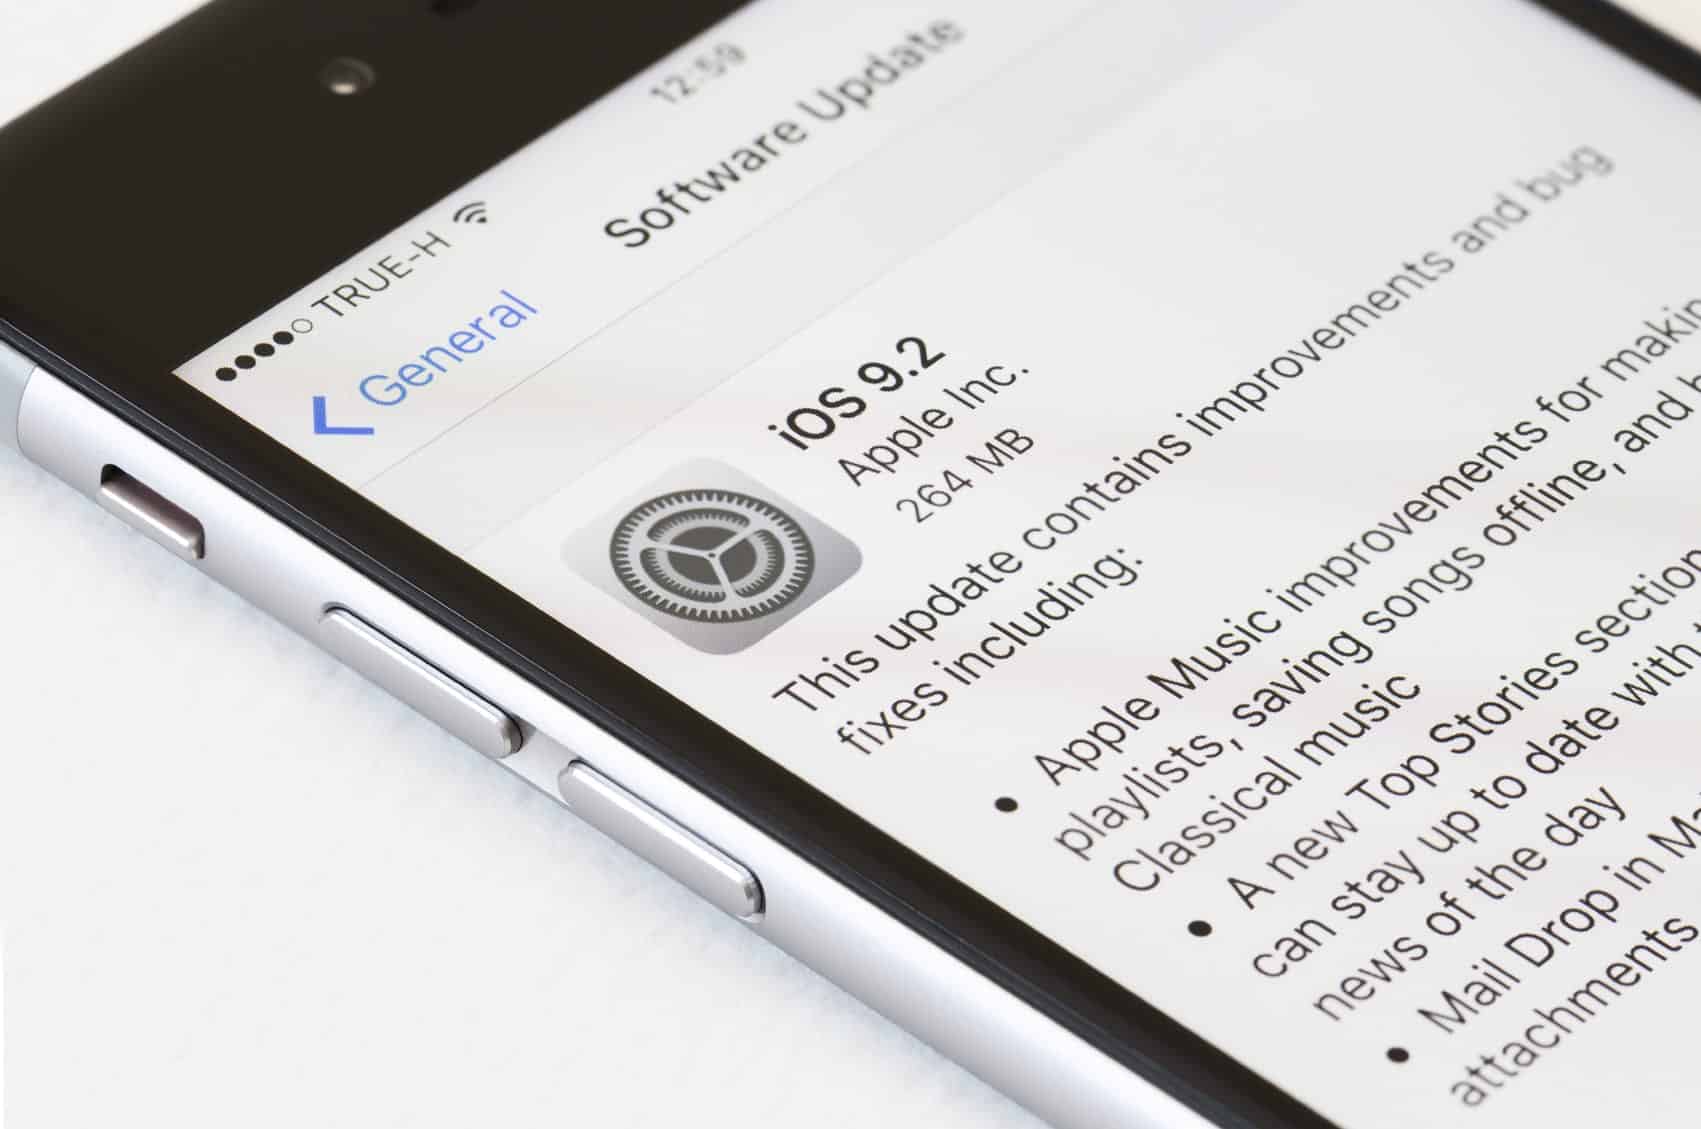 What You Need to Know About iOS 9 Ad Blockers